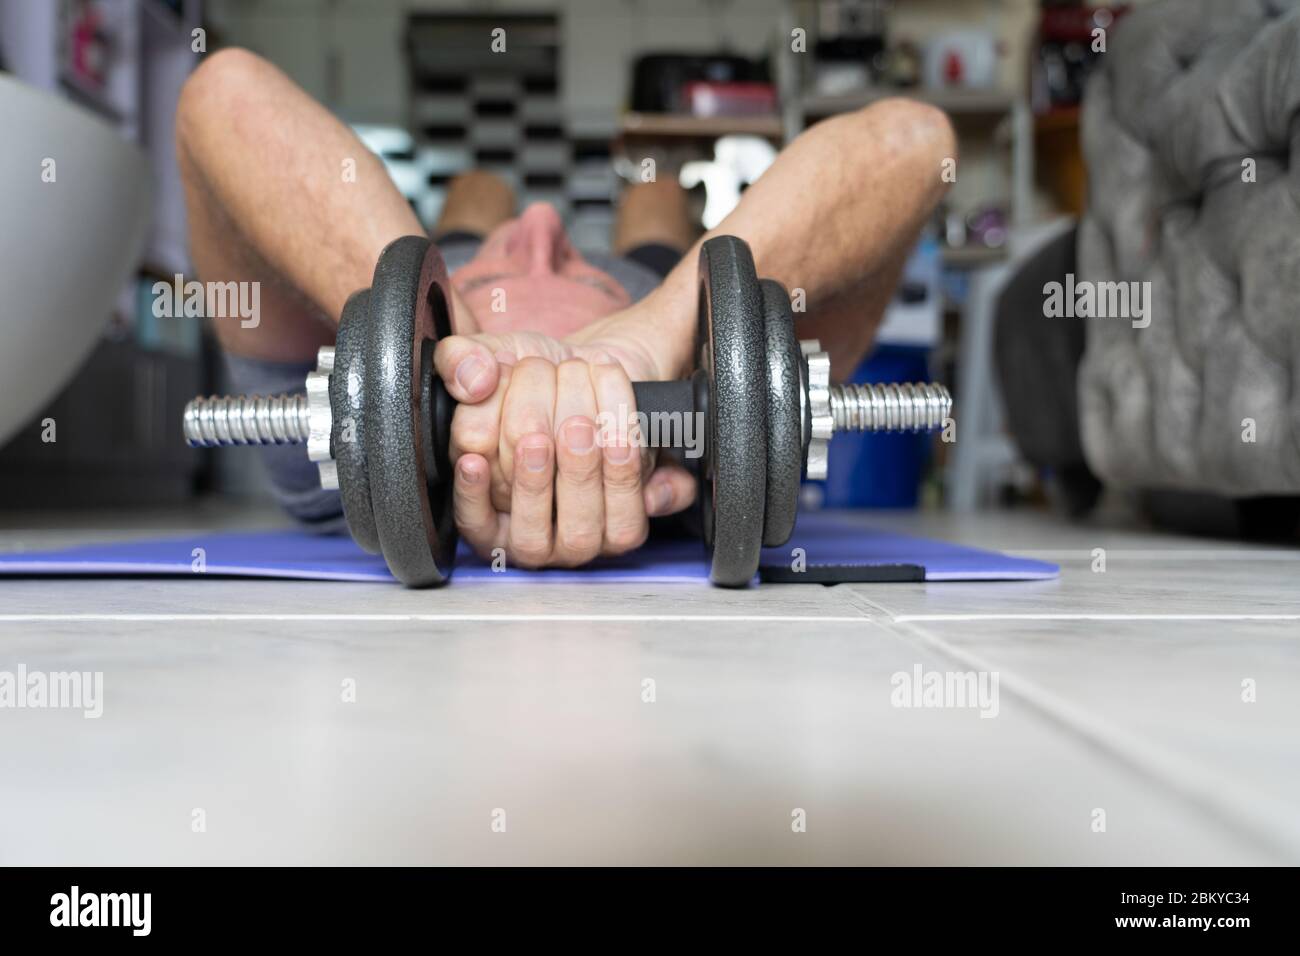 A man undertaking physical fitness exercise within an apartment during the COVID-19 Pandemic 2020. Stock Photo